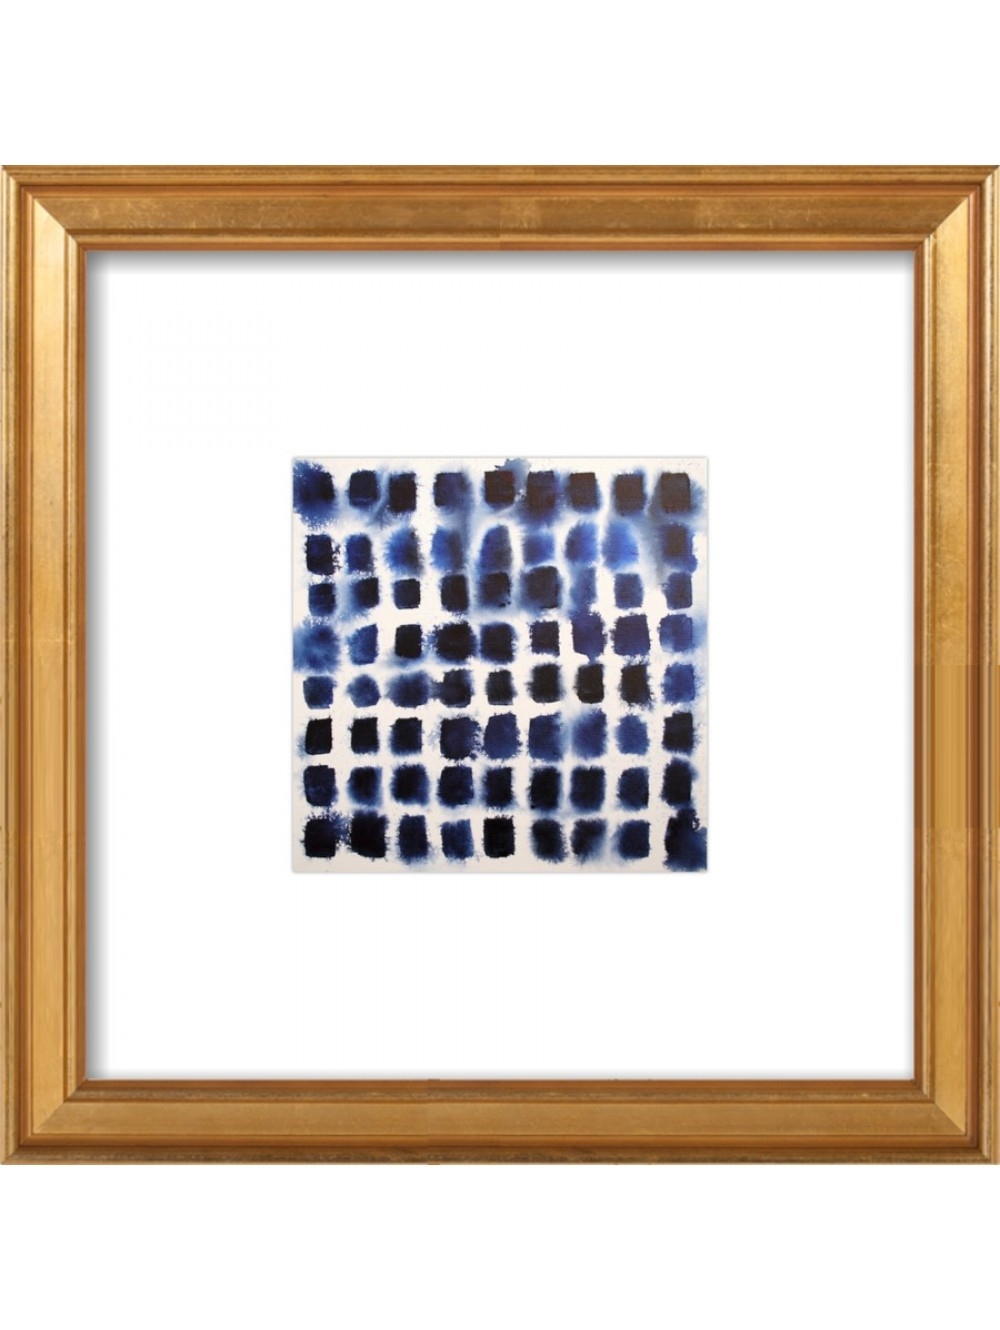 INDIGO BLOCKS BY KELLY WITMER FOR ARTFULLY WALLS - 12" x 12" - Gold matted frame - Image 0